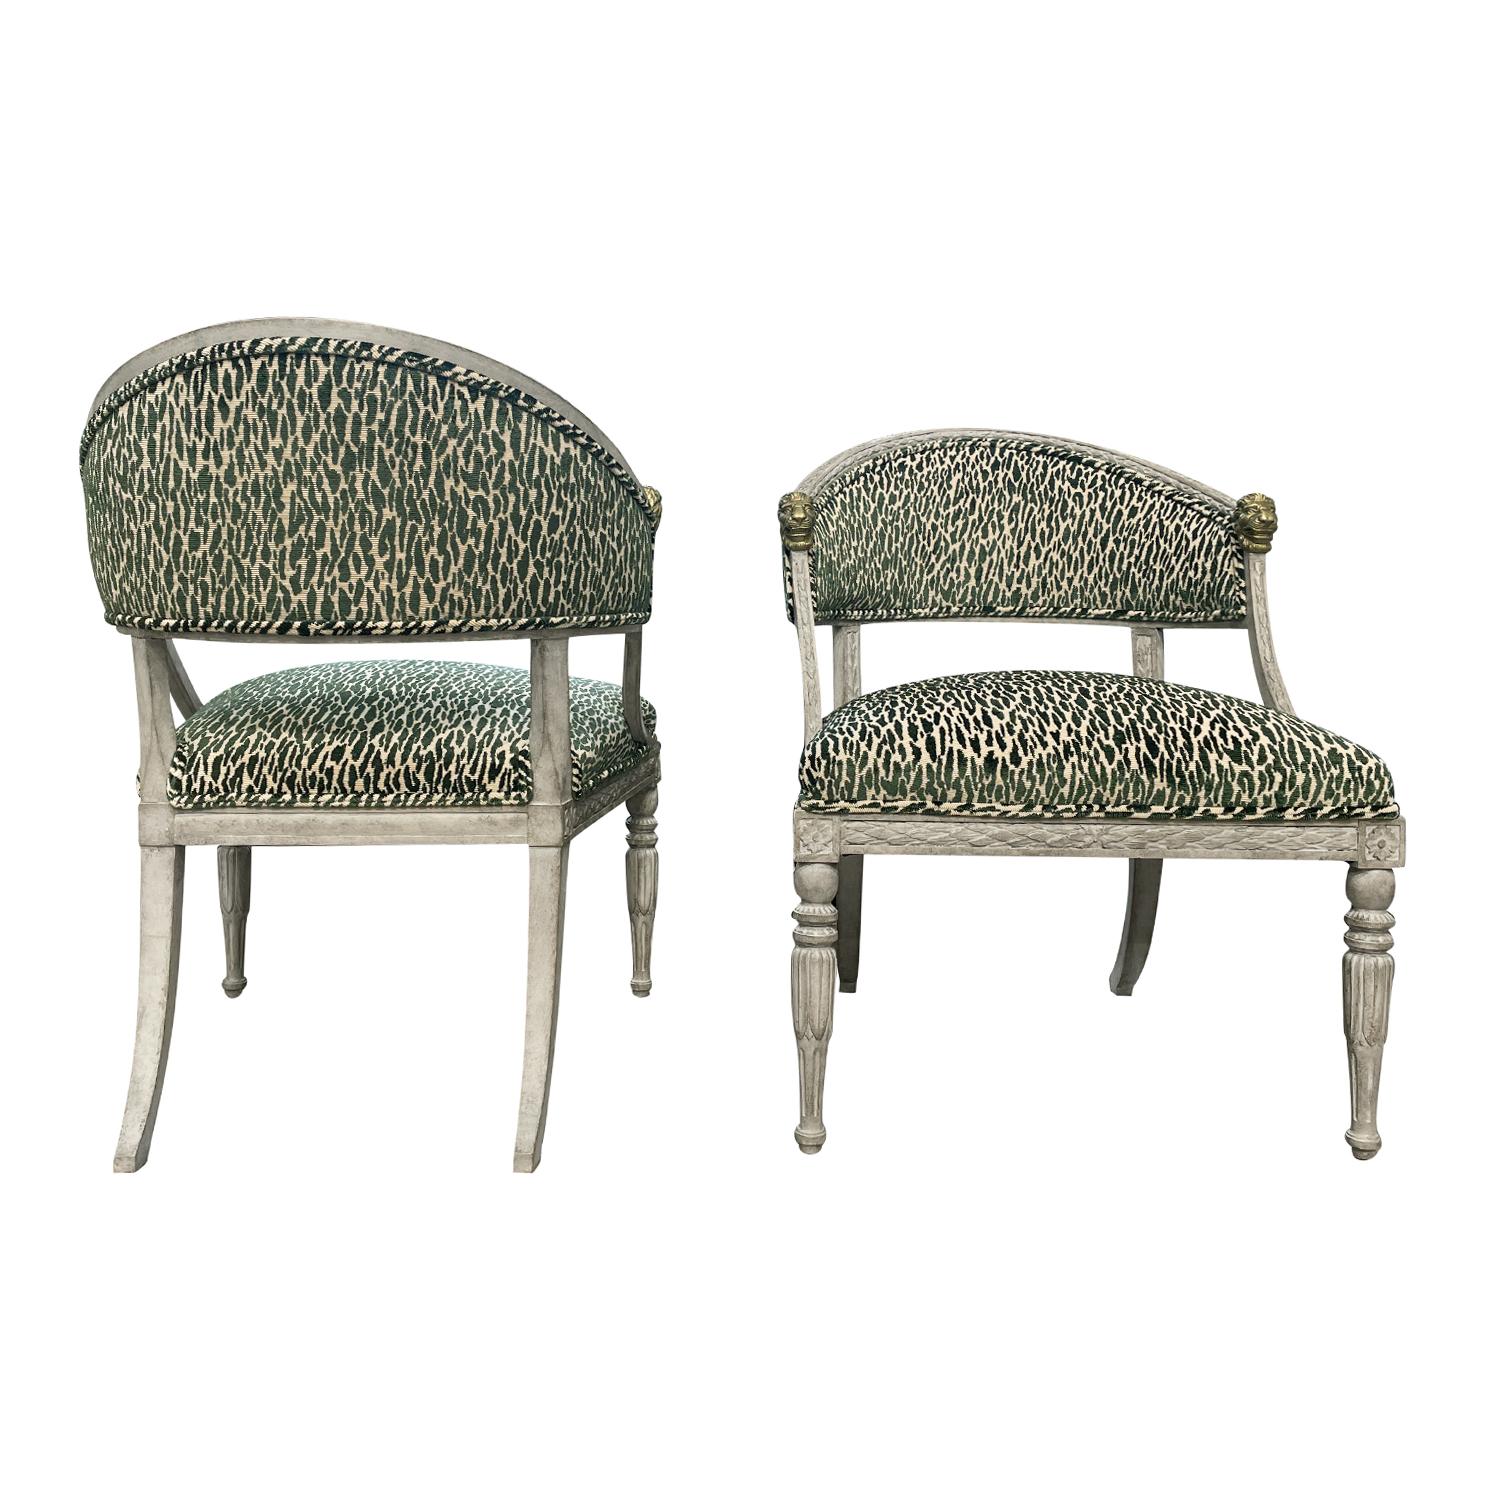 Pair of 19th Century Swedish Gustavian Side Chairs Attributed to Ephraim Ståhl In Good Condition For Sale In West Palm Beach, FL